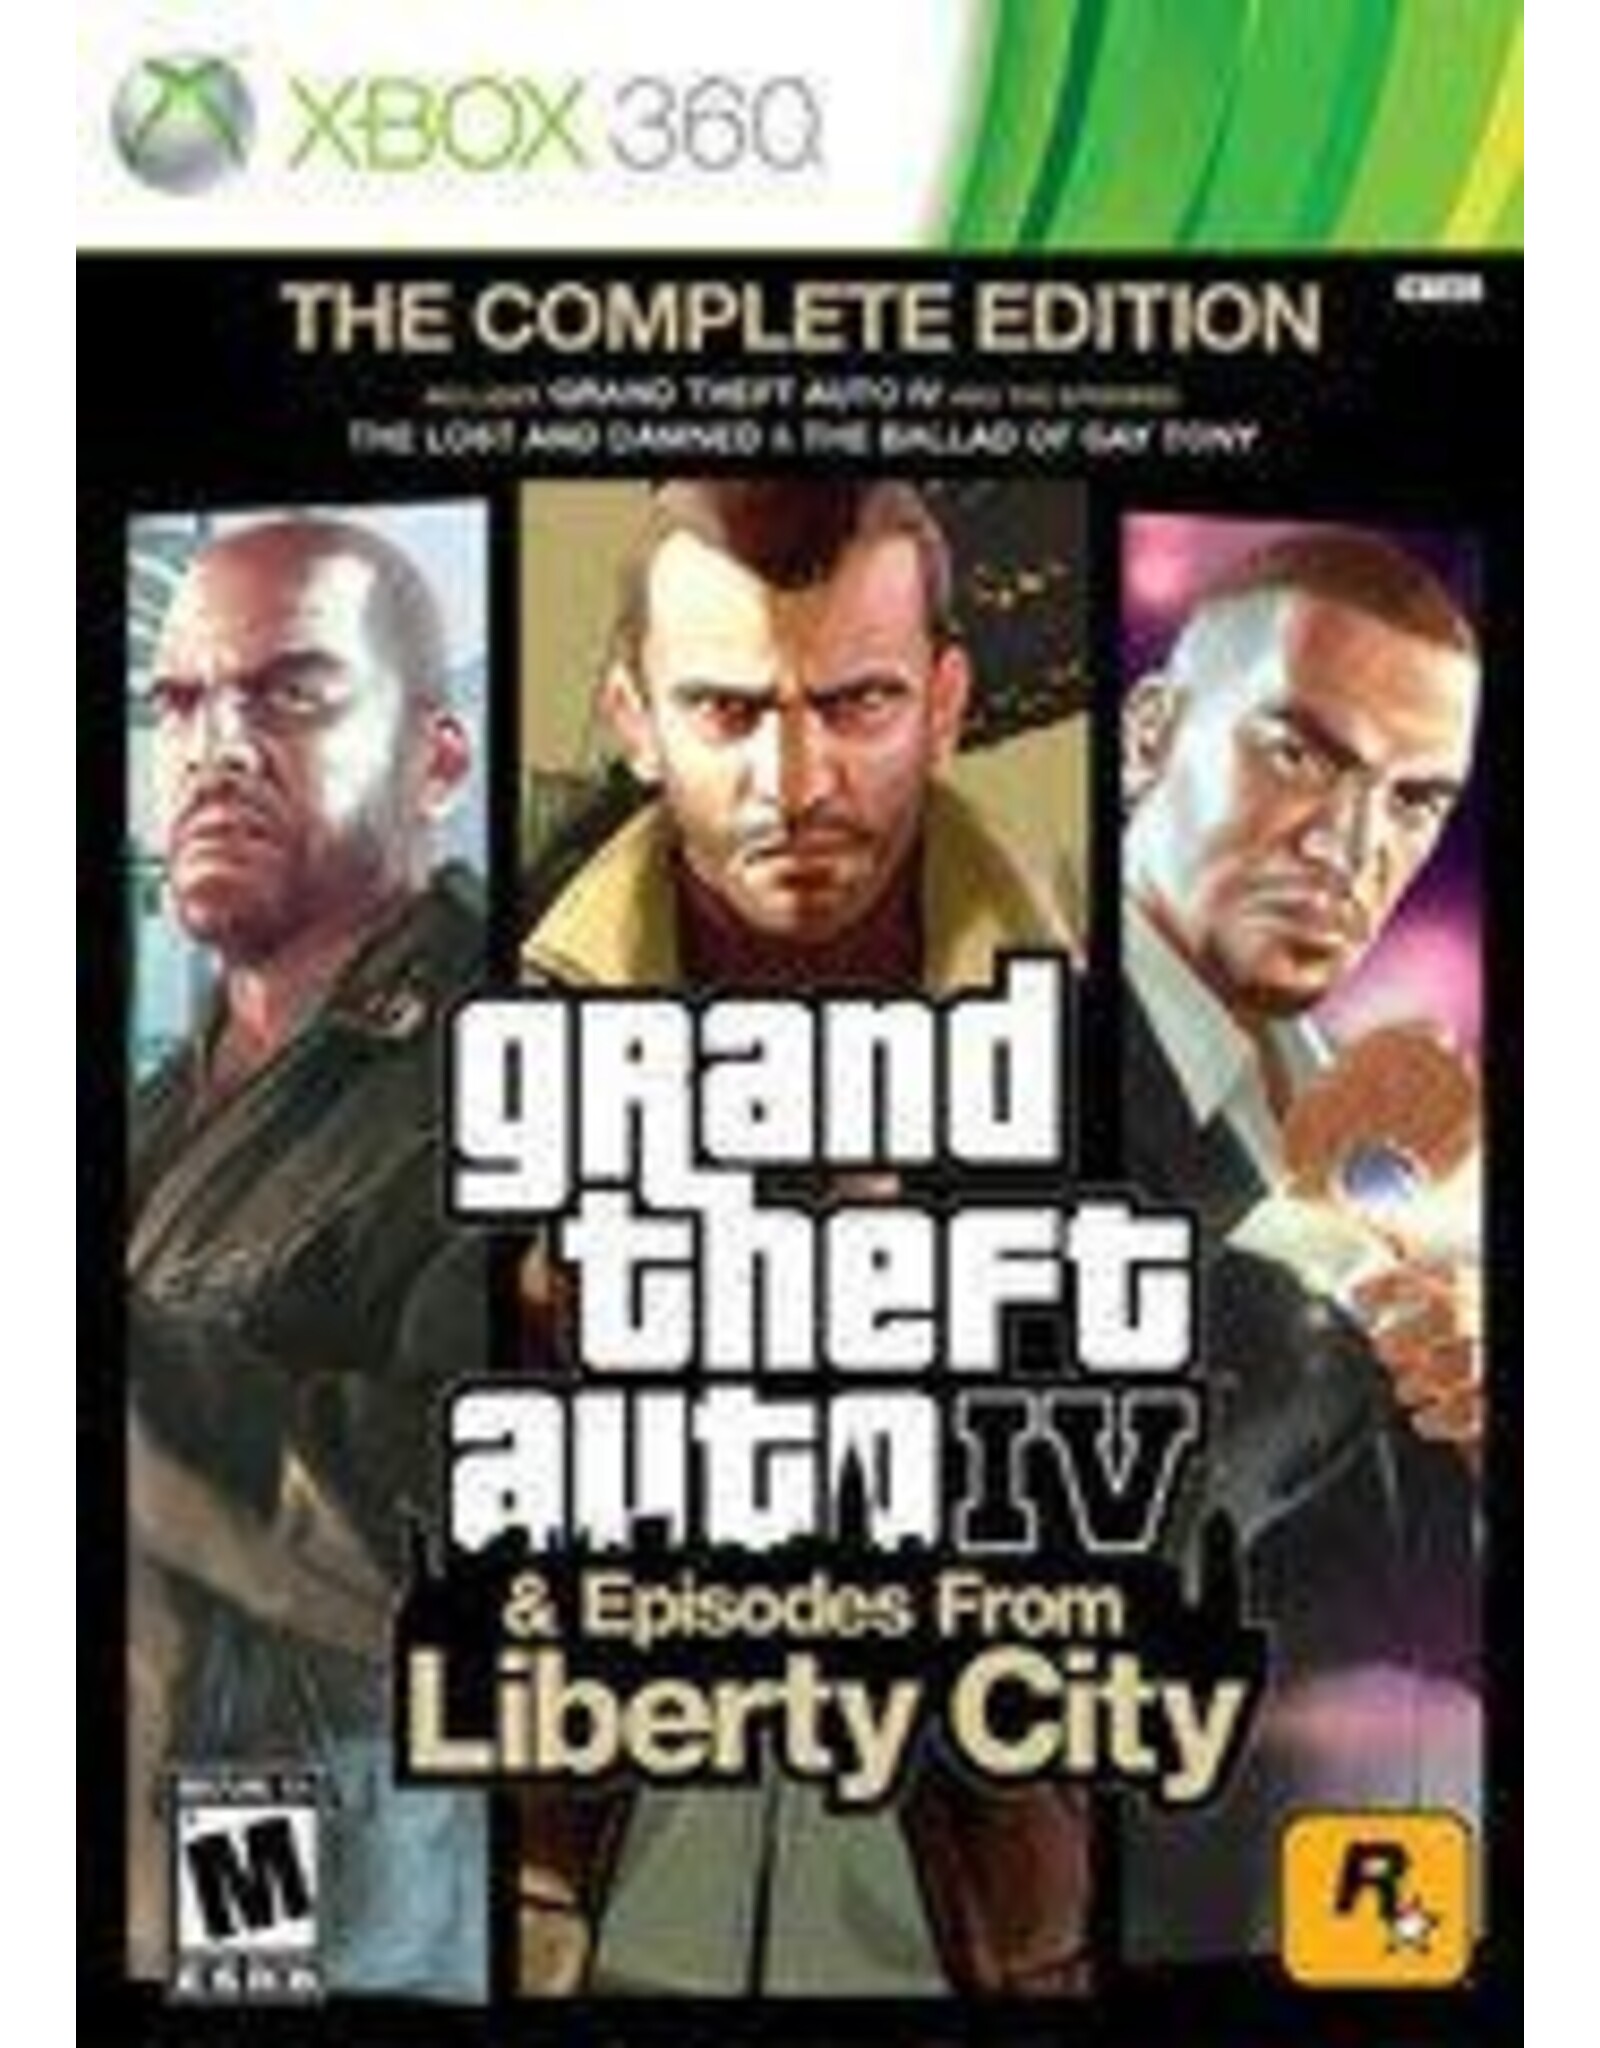 Xbox 360 Grand Theft Auto IV: Complete Edition (Used, No Manual)